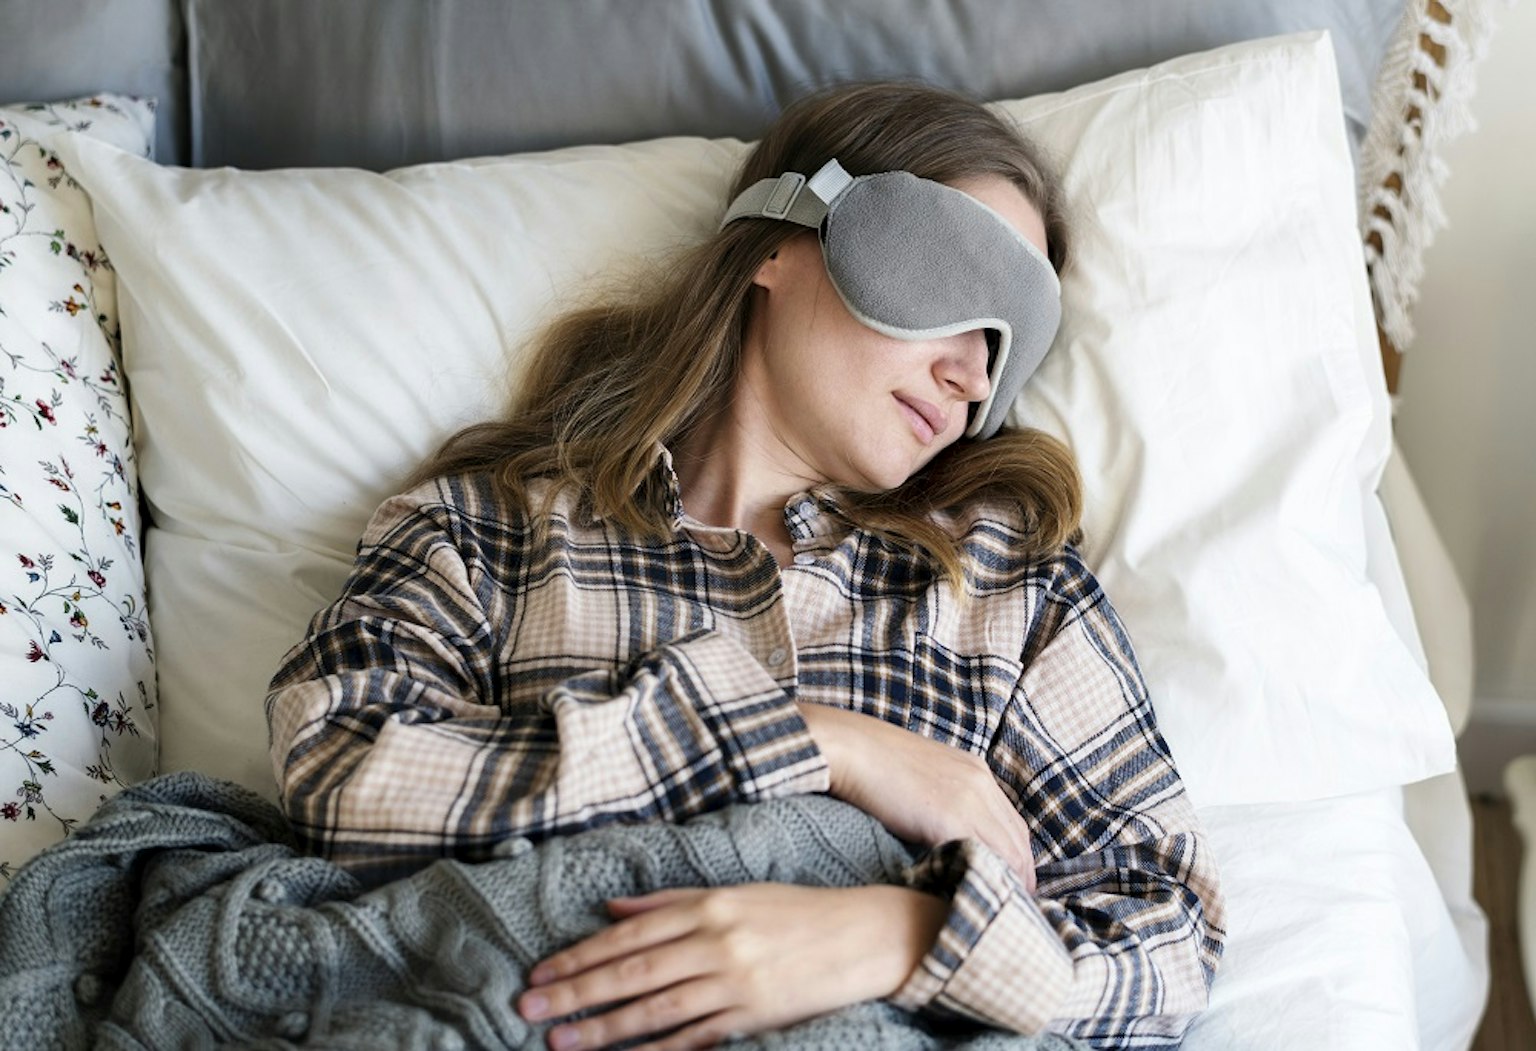 A woman, laying in bed, sleeping with a sleeping mask.